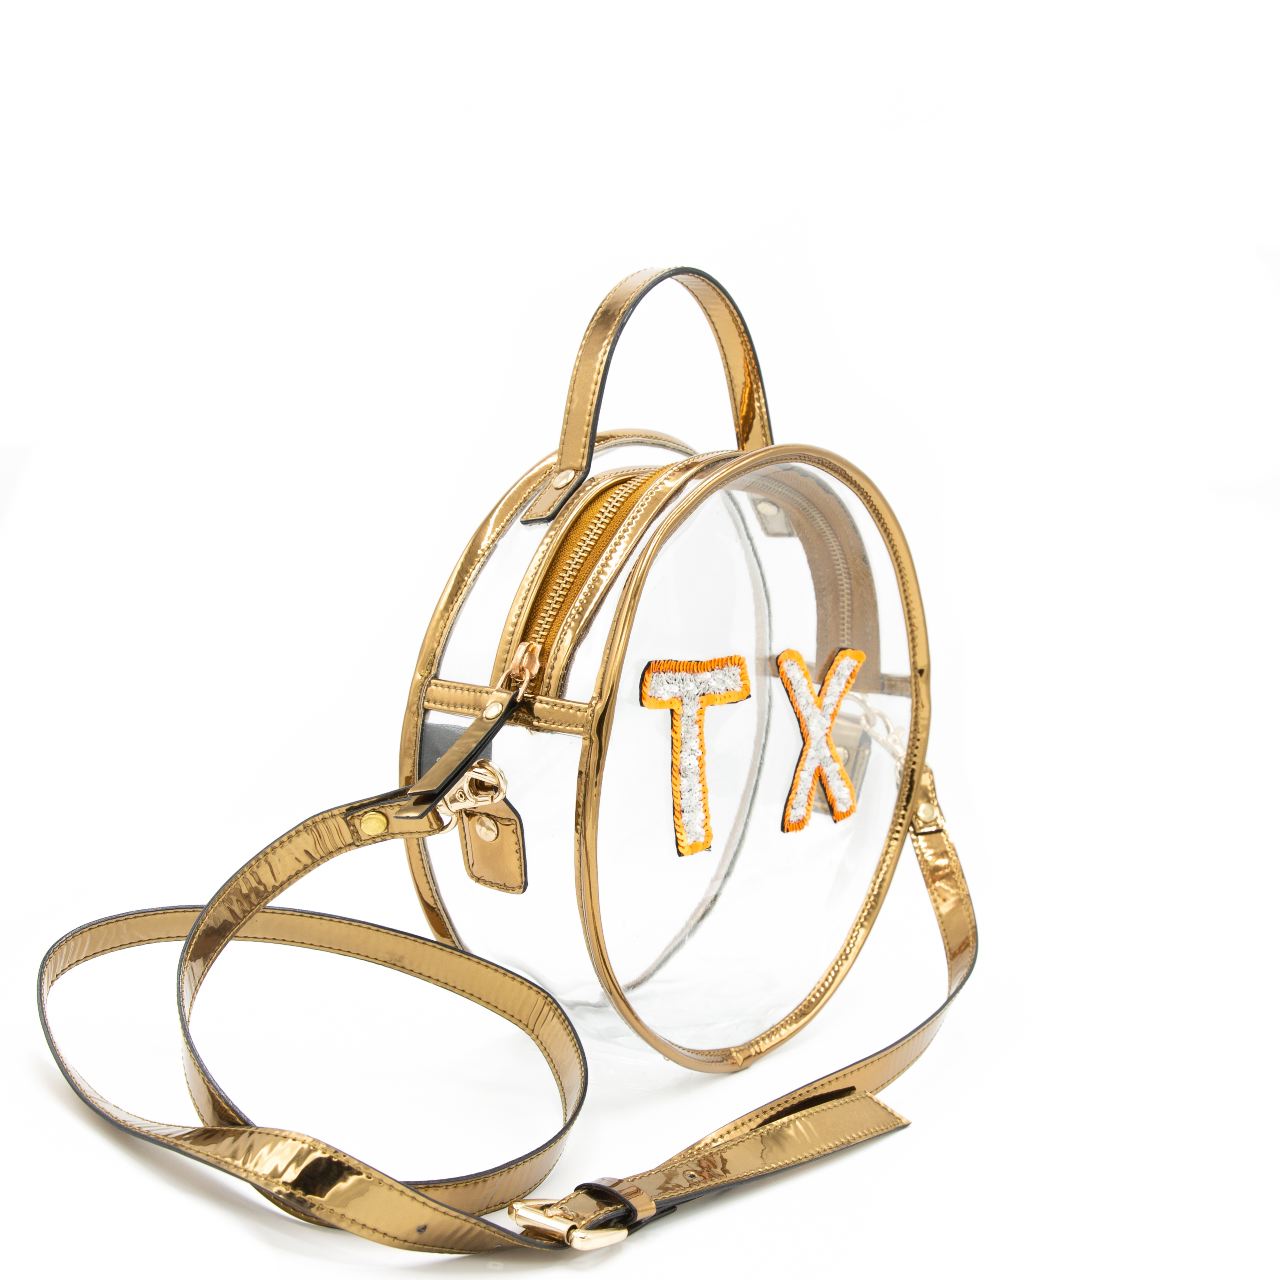 Texas Round Game Day Bag by Simitri